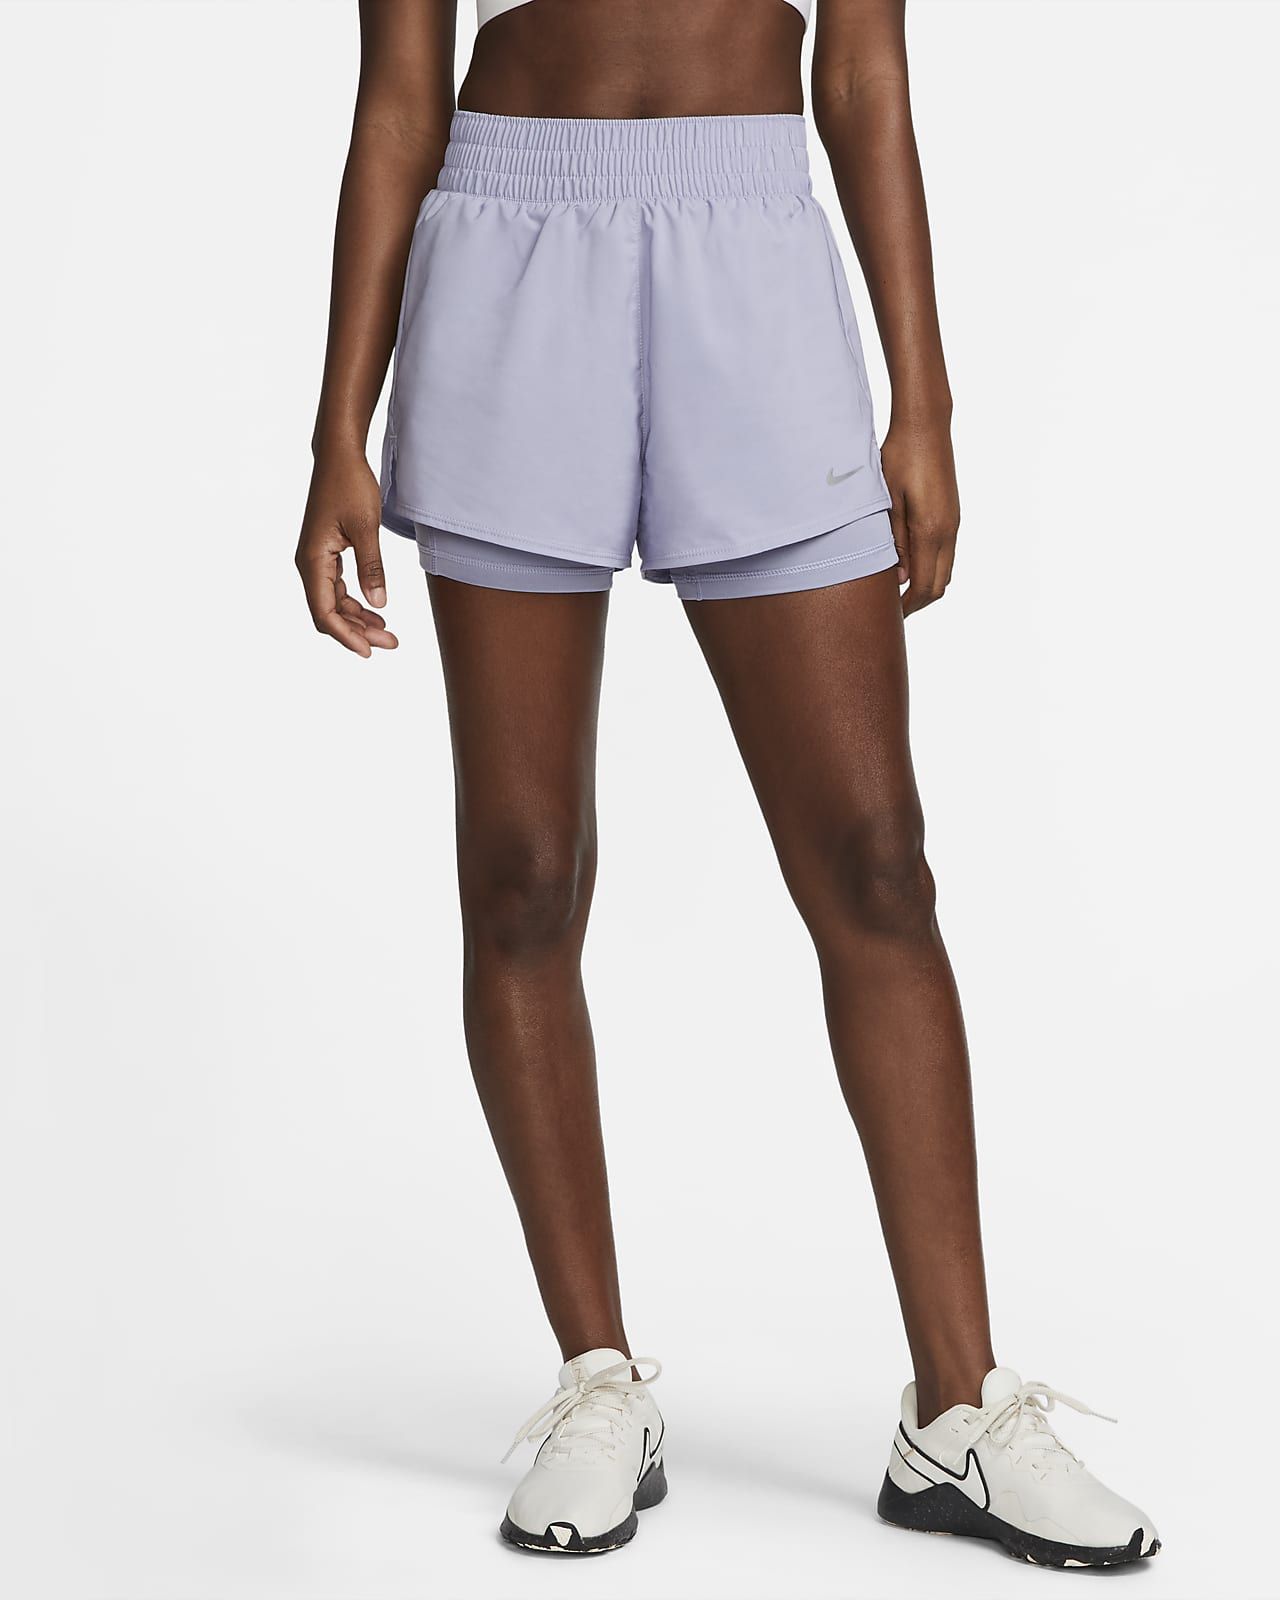 Women's Dri-FIT Fitness High-Waisted 3" 2-in-1 Shorts | Nike (US)